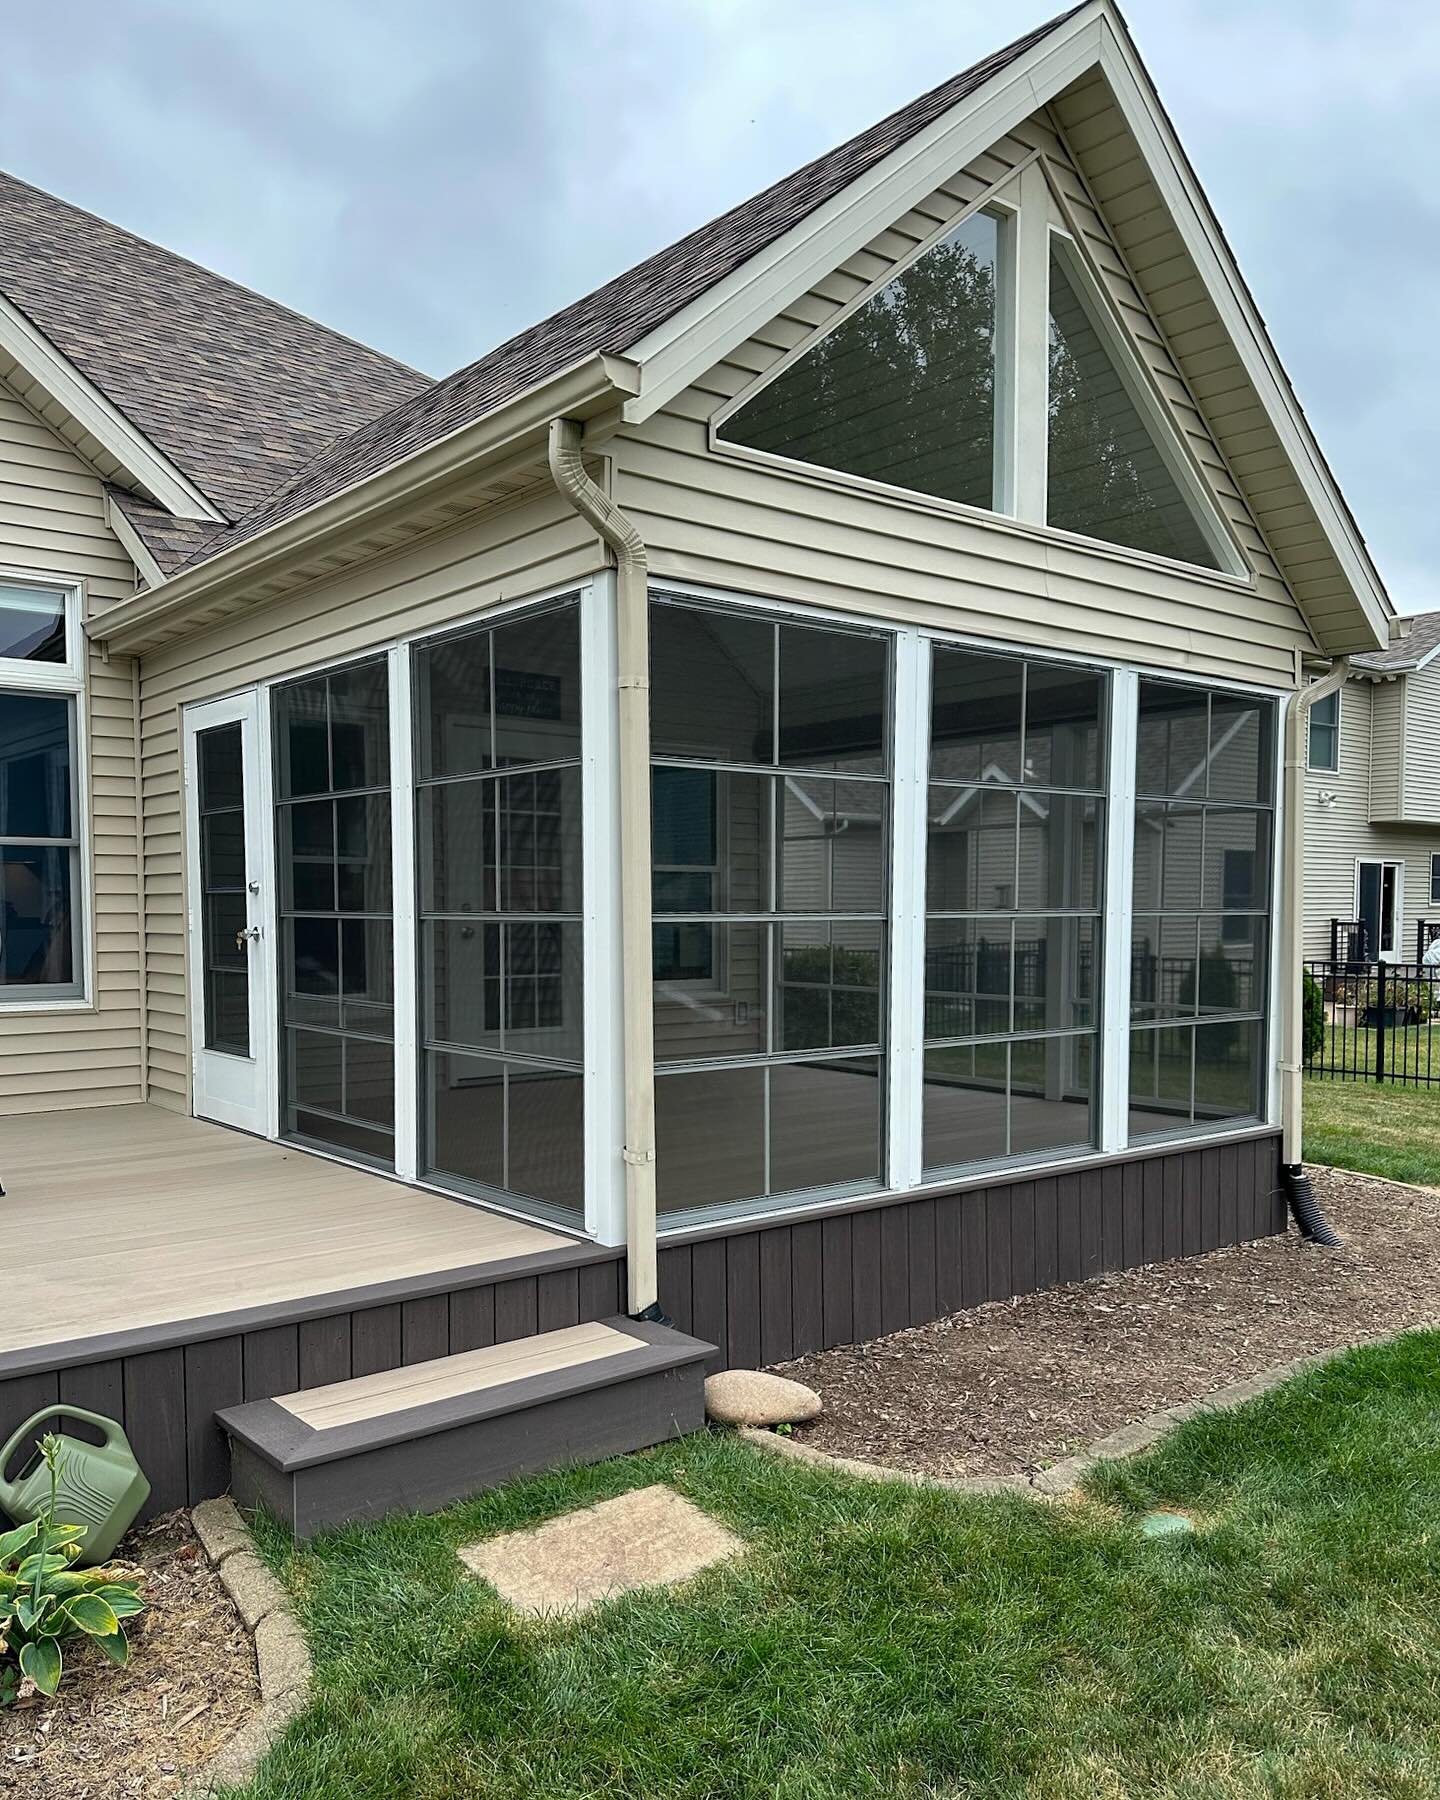 We originally completed this deck project in early summer and updated the existing wood deck to a maintenance-free option&hellip;but once our client&rsquo;s saw how nice their new deck was they decided to upgrade their standard screened porch to an E